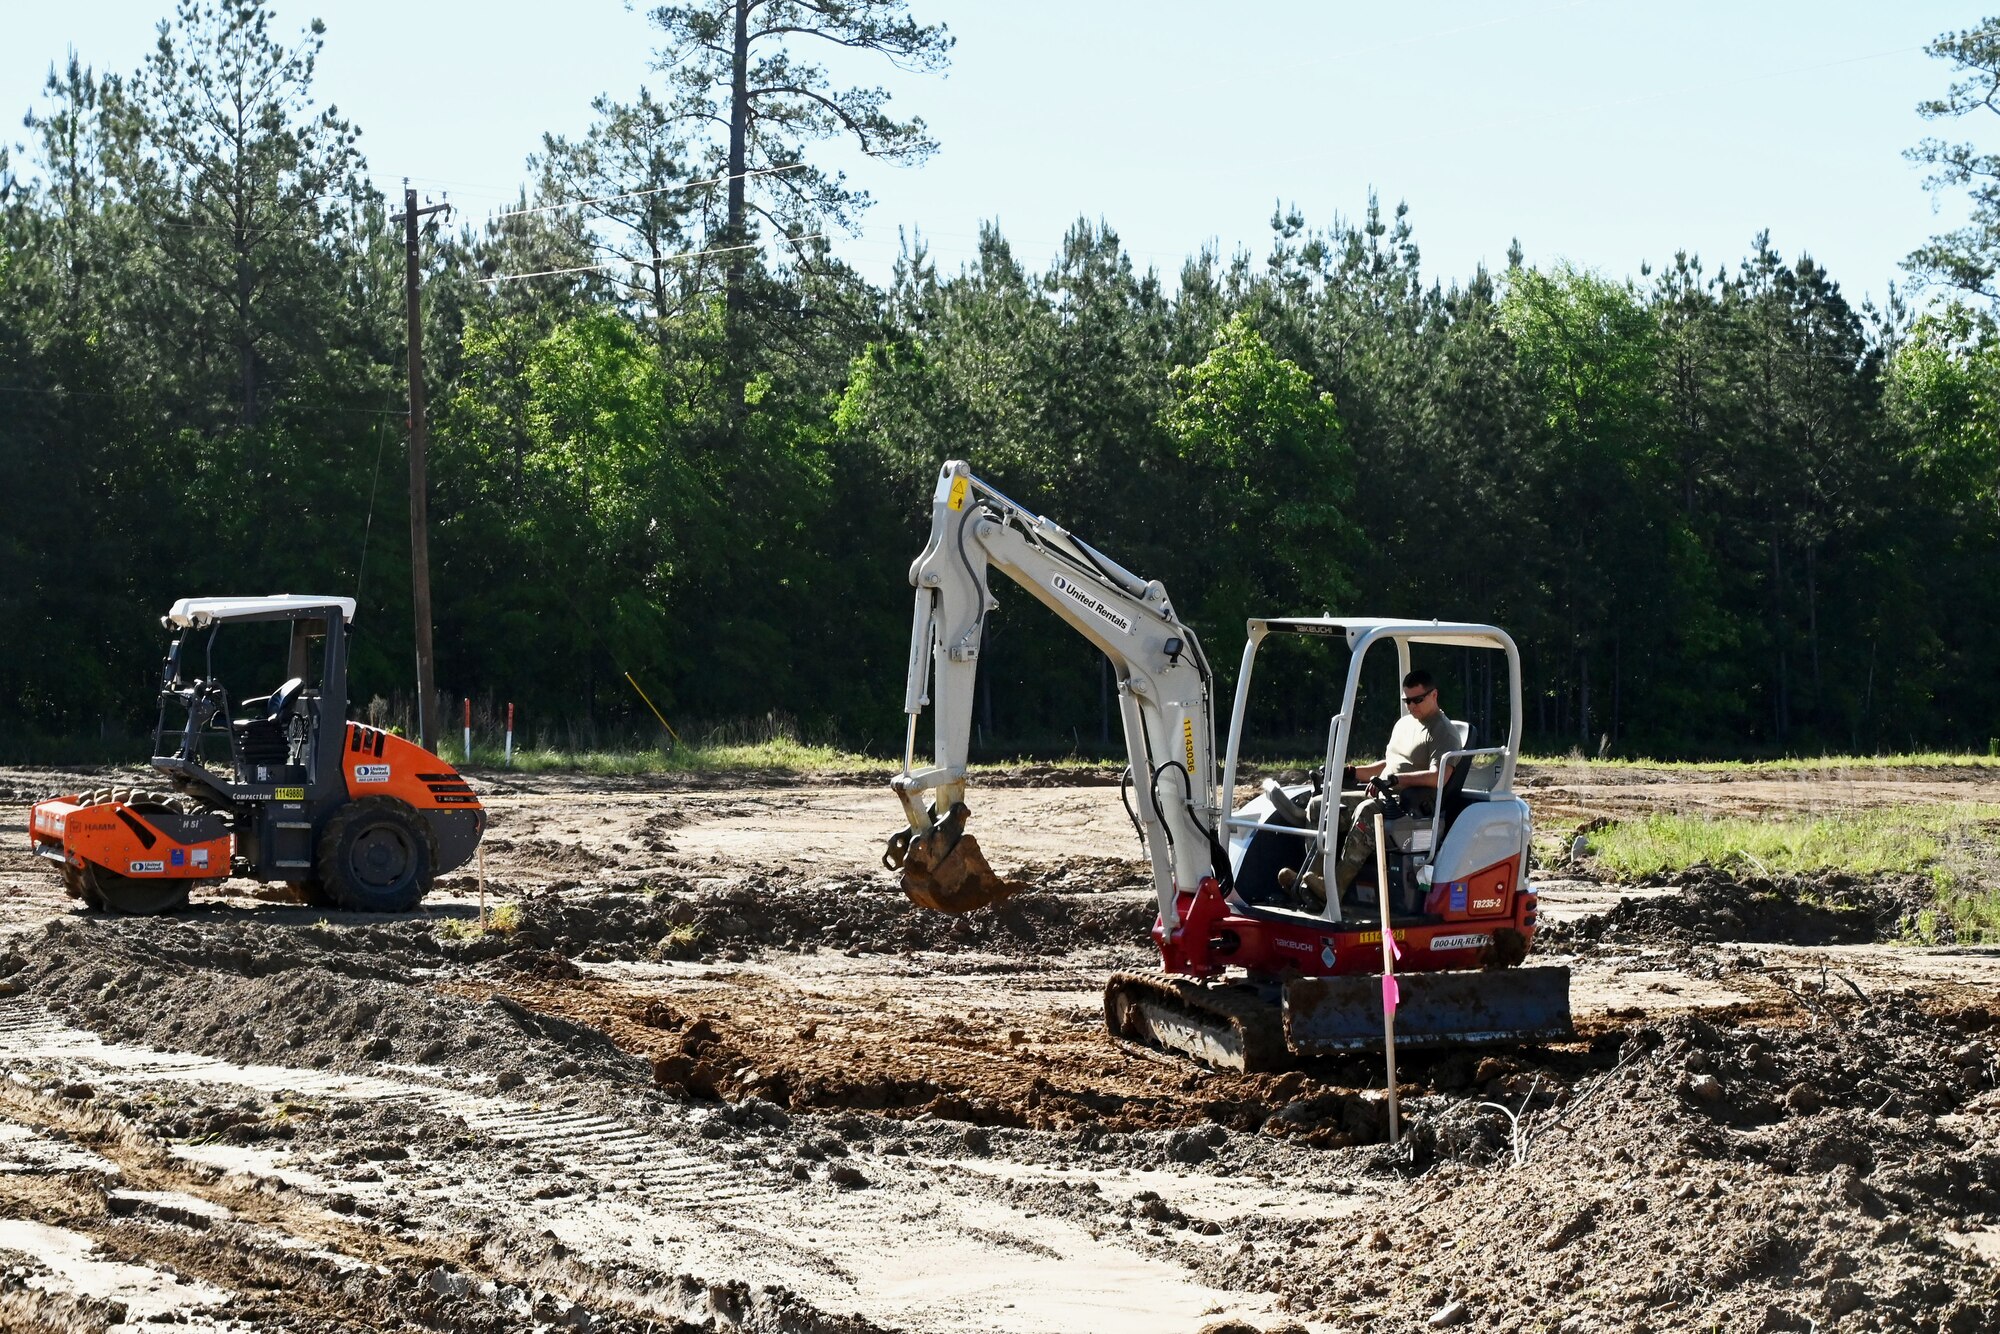 Photo of Airman working on an excavator.